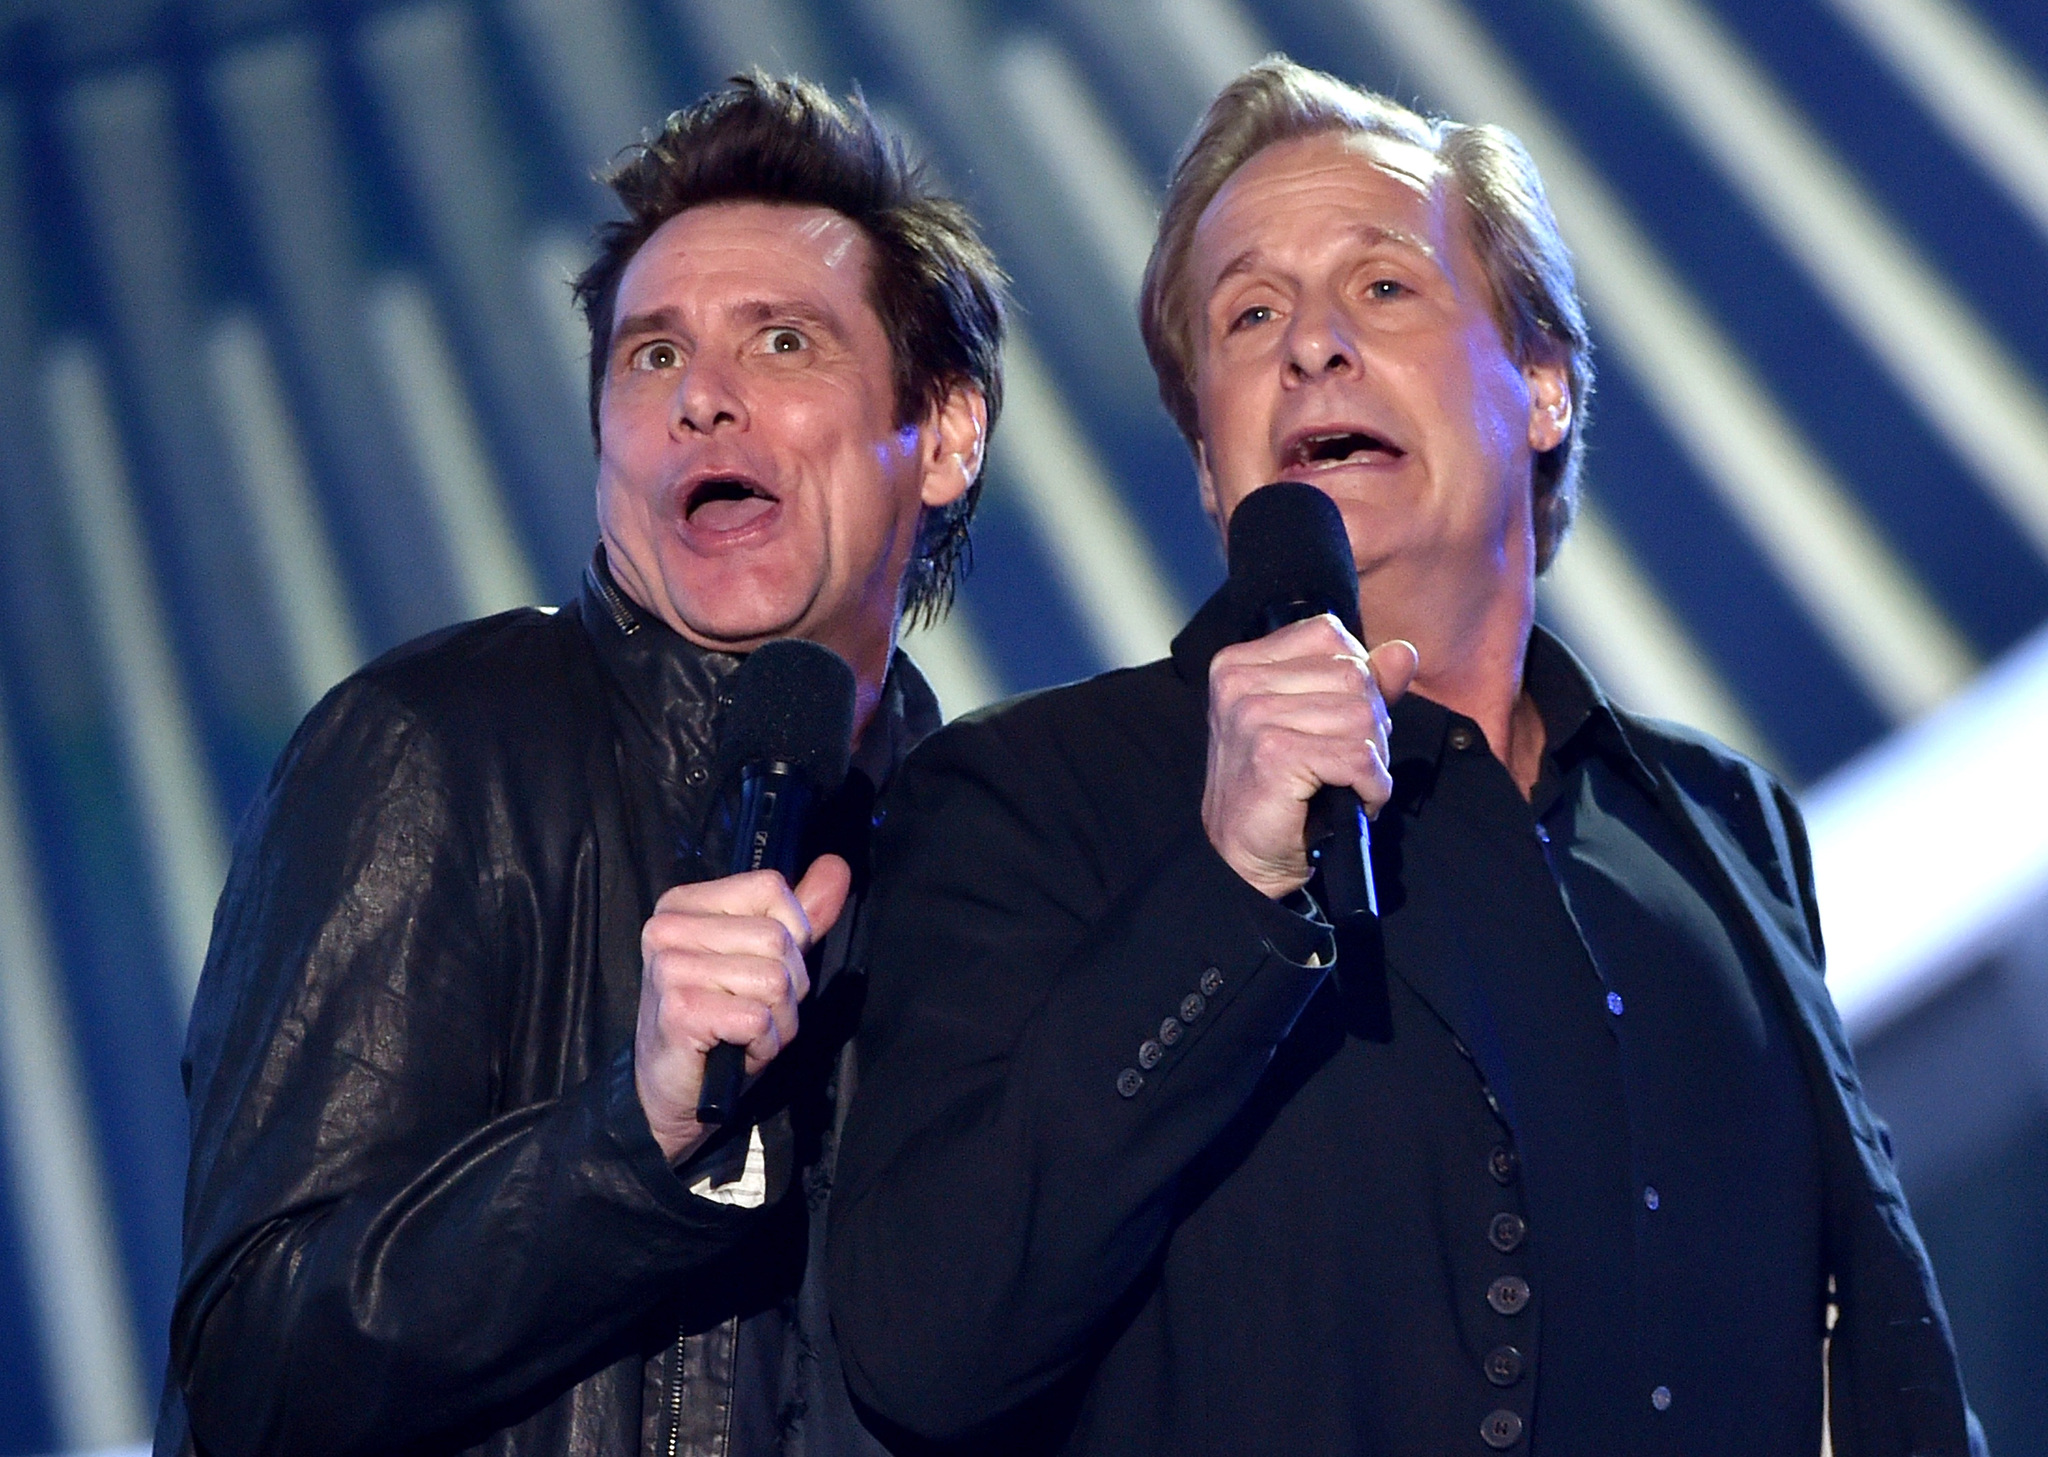 Jim Carrey and Jeff Daniels at event of 2014 MTV Video Music Awards (2014)